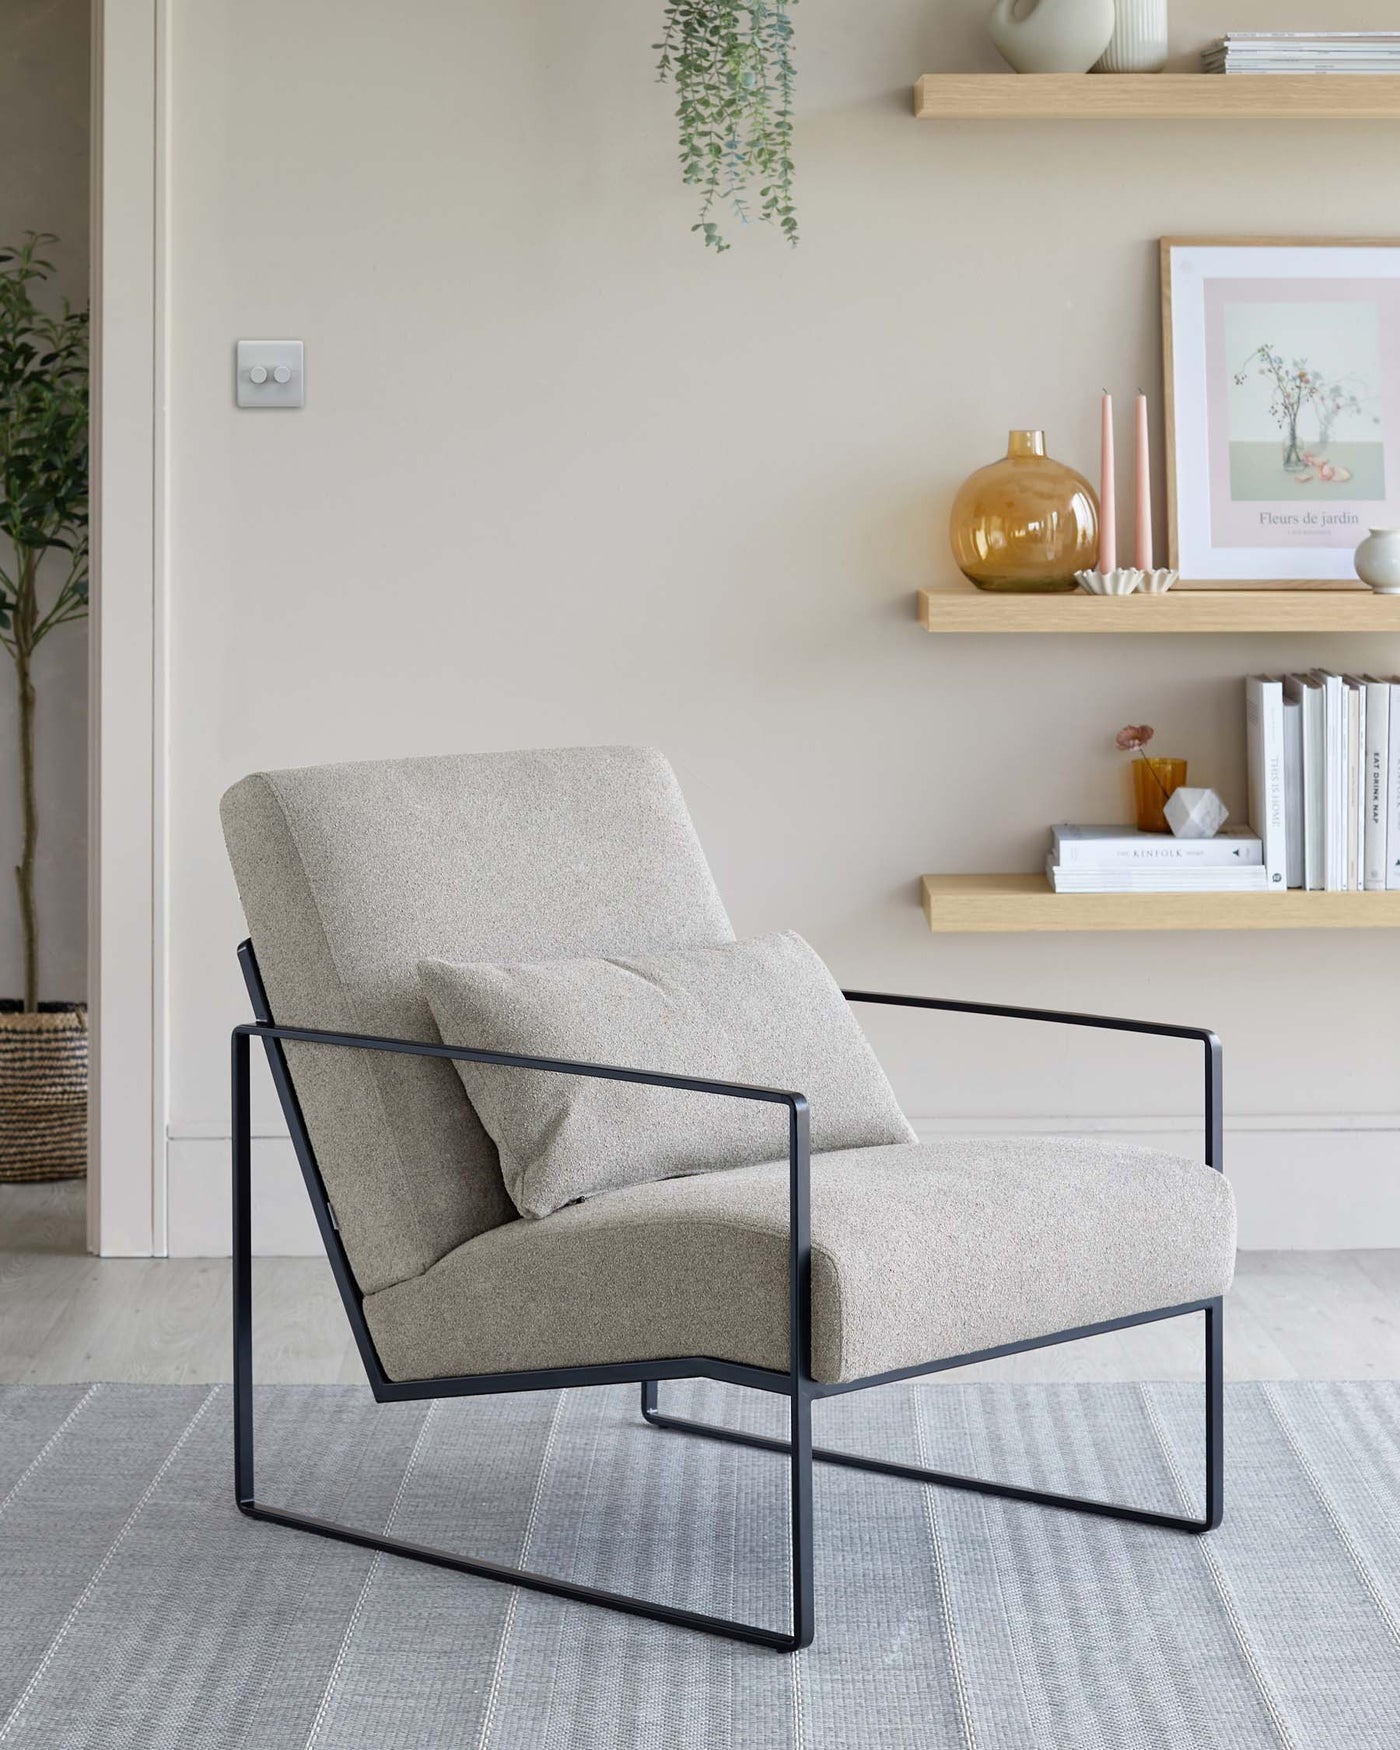 A contemporary light beige fabric upholstered armchair with a minimalist black metal frame, featuring a comfortable backrest and a cushioned seat with a pillow, set against a neutral-toned room with decorative shelving on the wall.